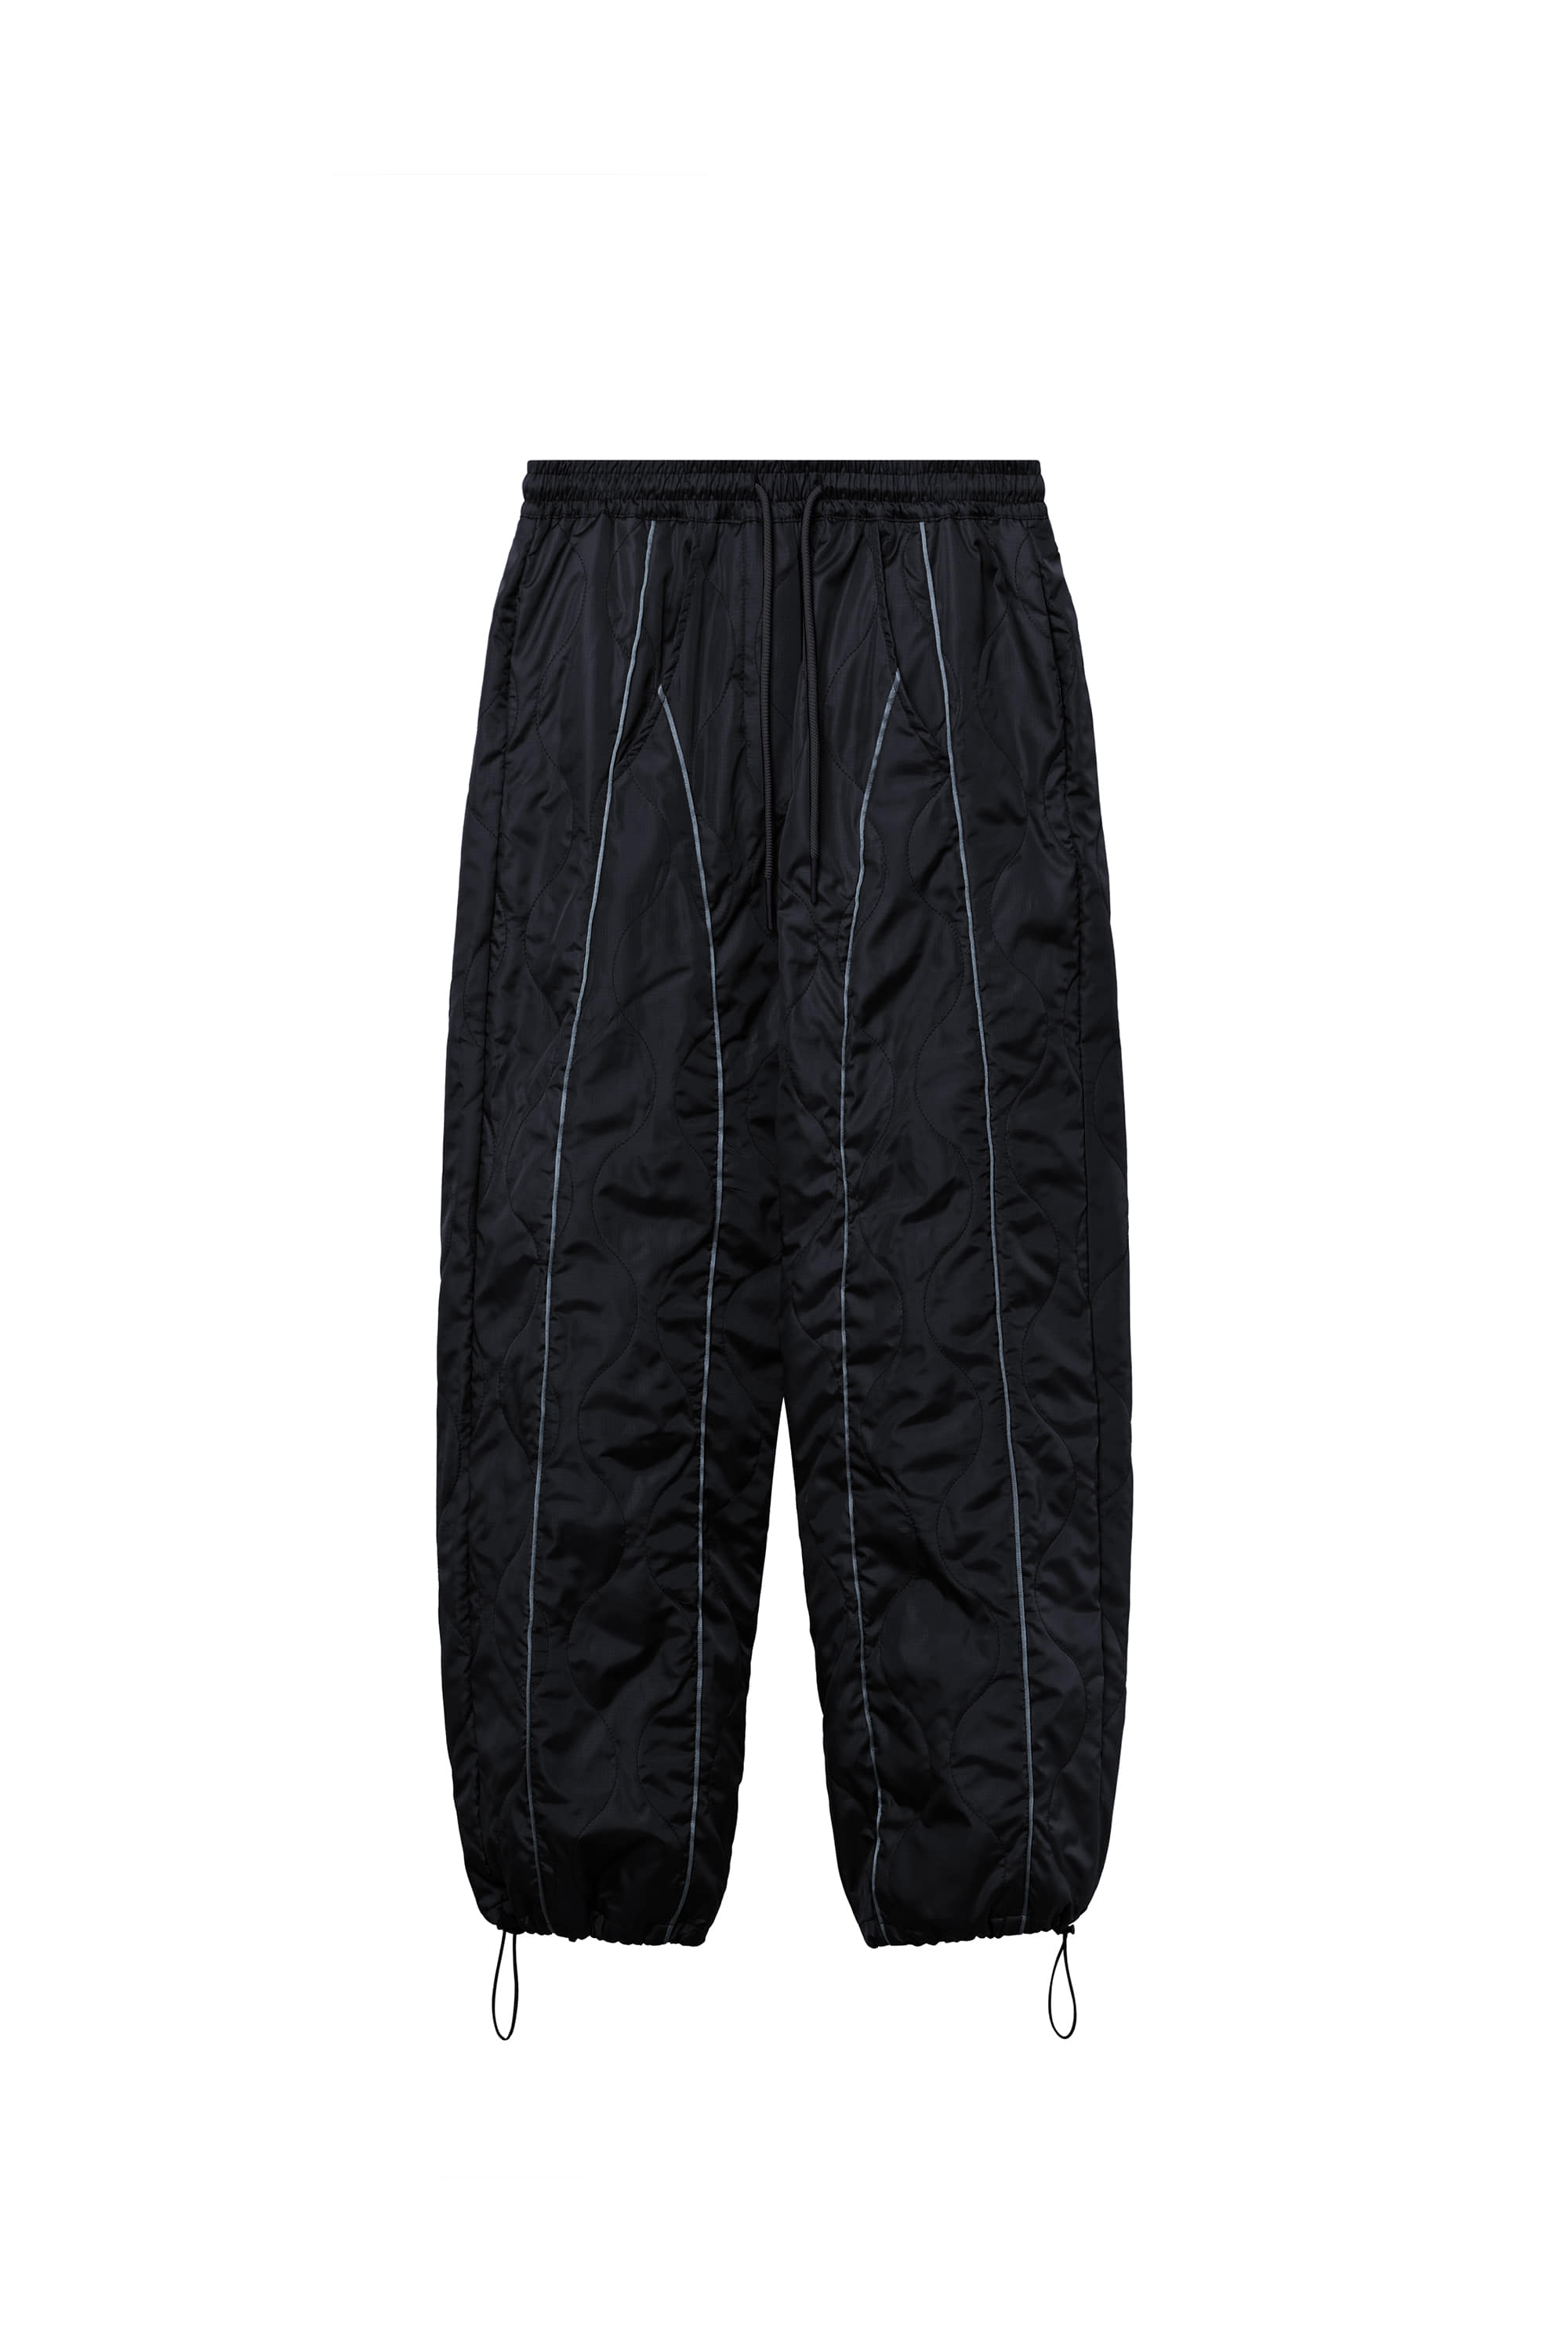 XAVIER QUILTED PANTS navy